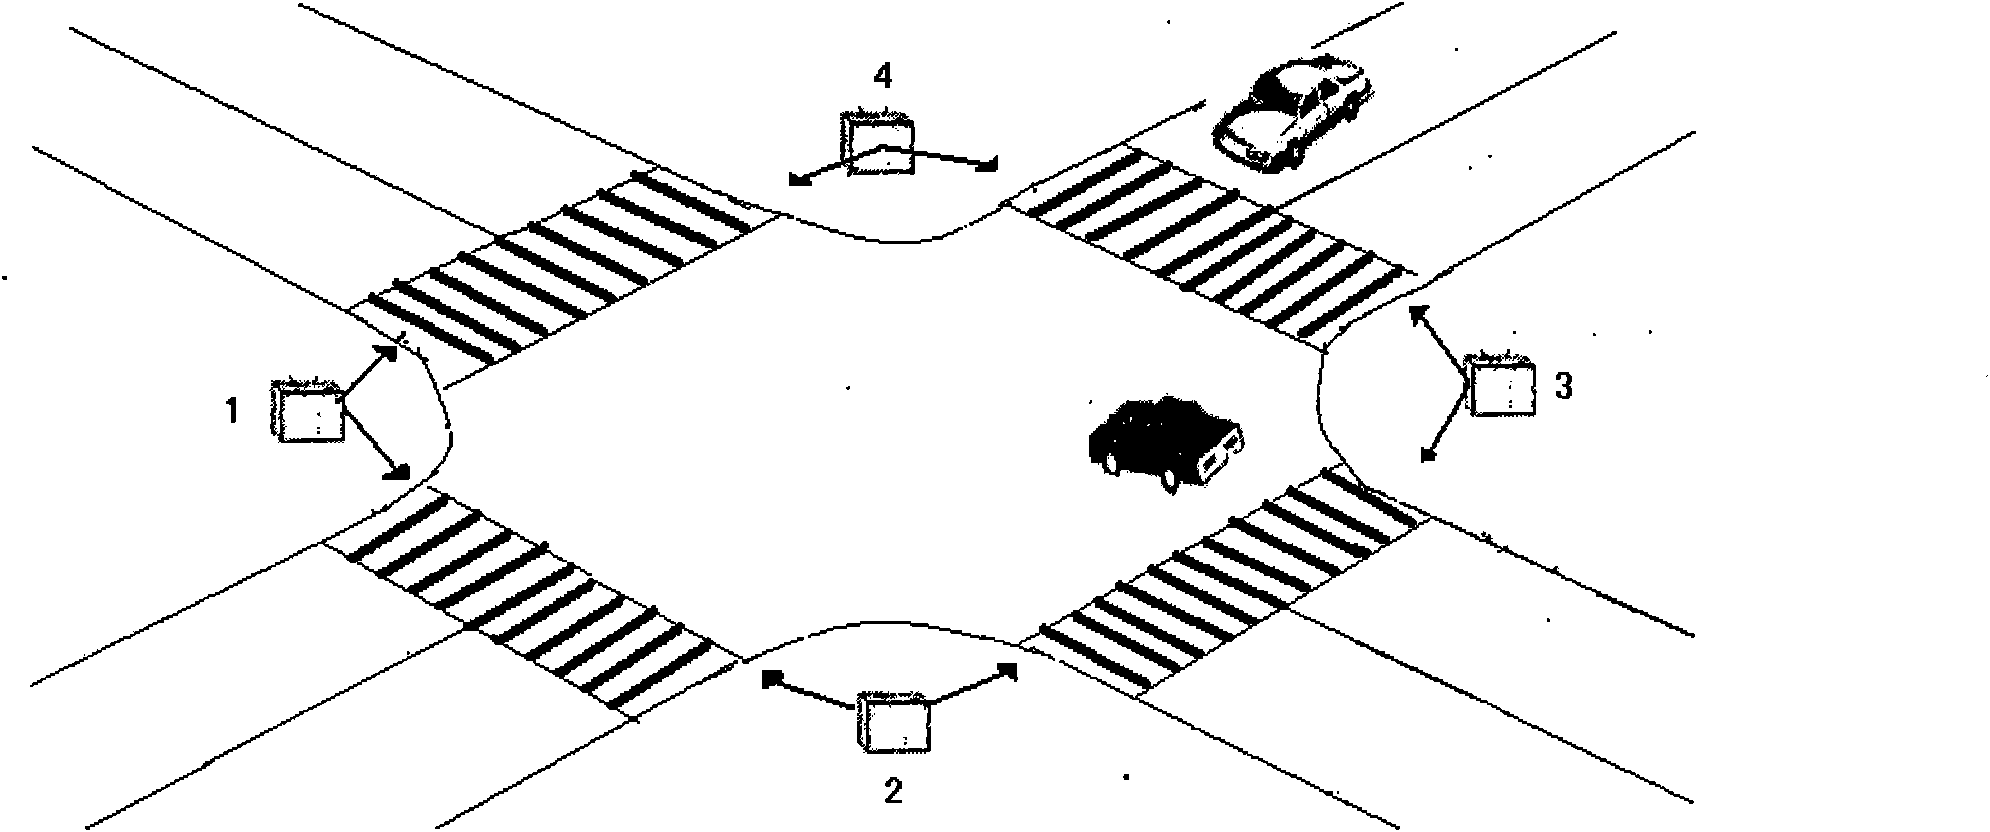 Road junction traffic conflict detection and safety evaluation method based on two-dimensional laser scanners